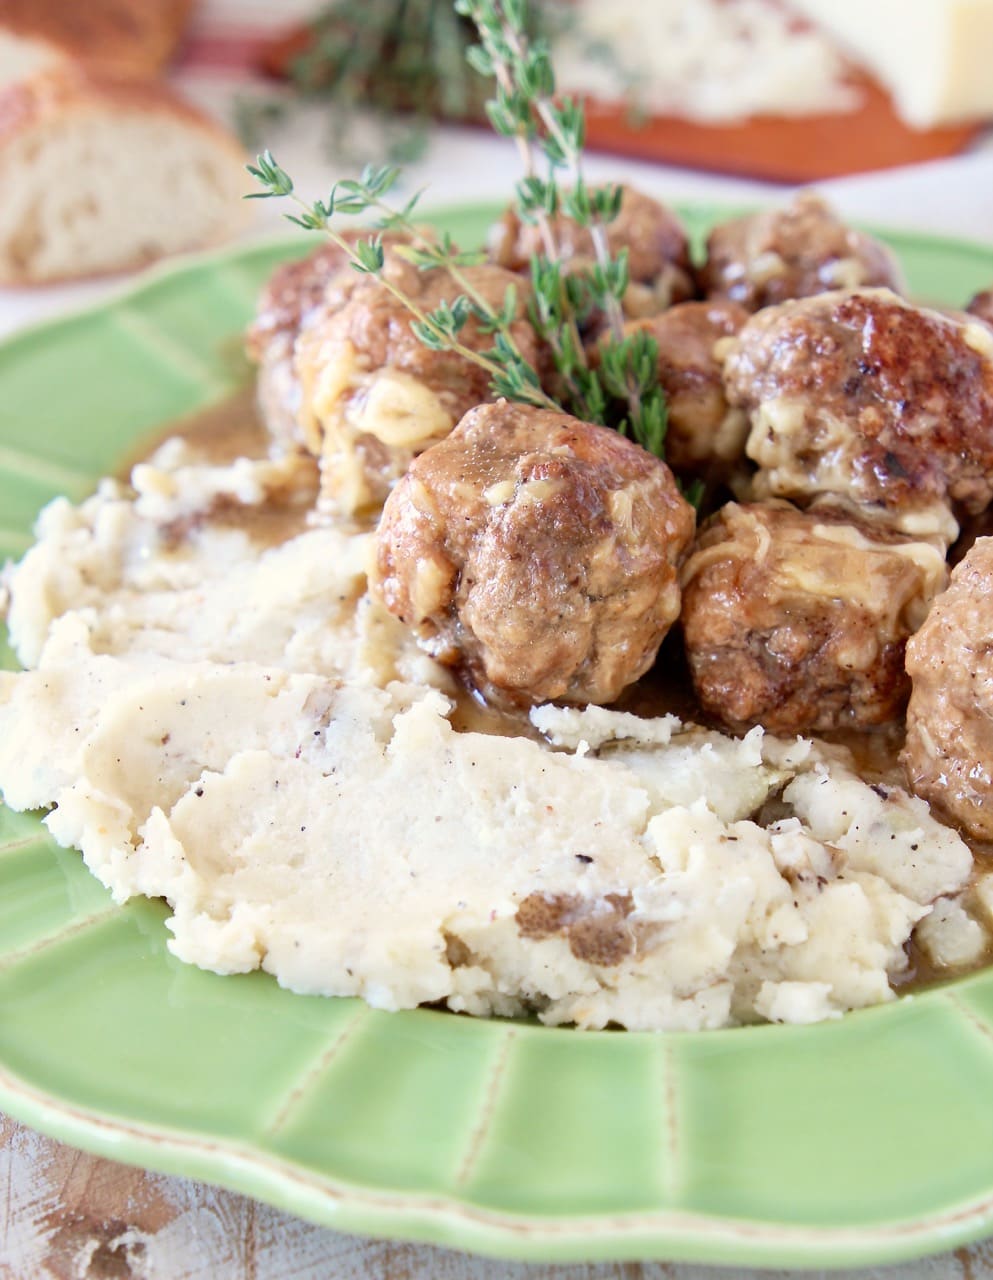 Green plate with mashed potatoes and meatballs, a fresh sprig of thyme and sliced baguette in the background